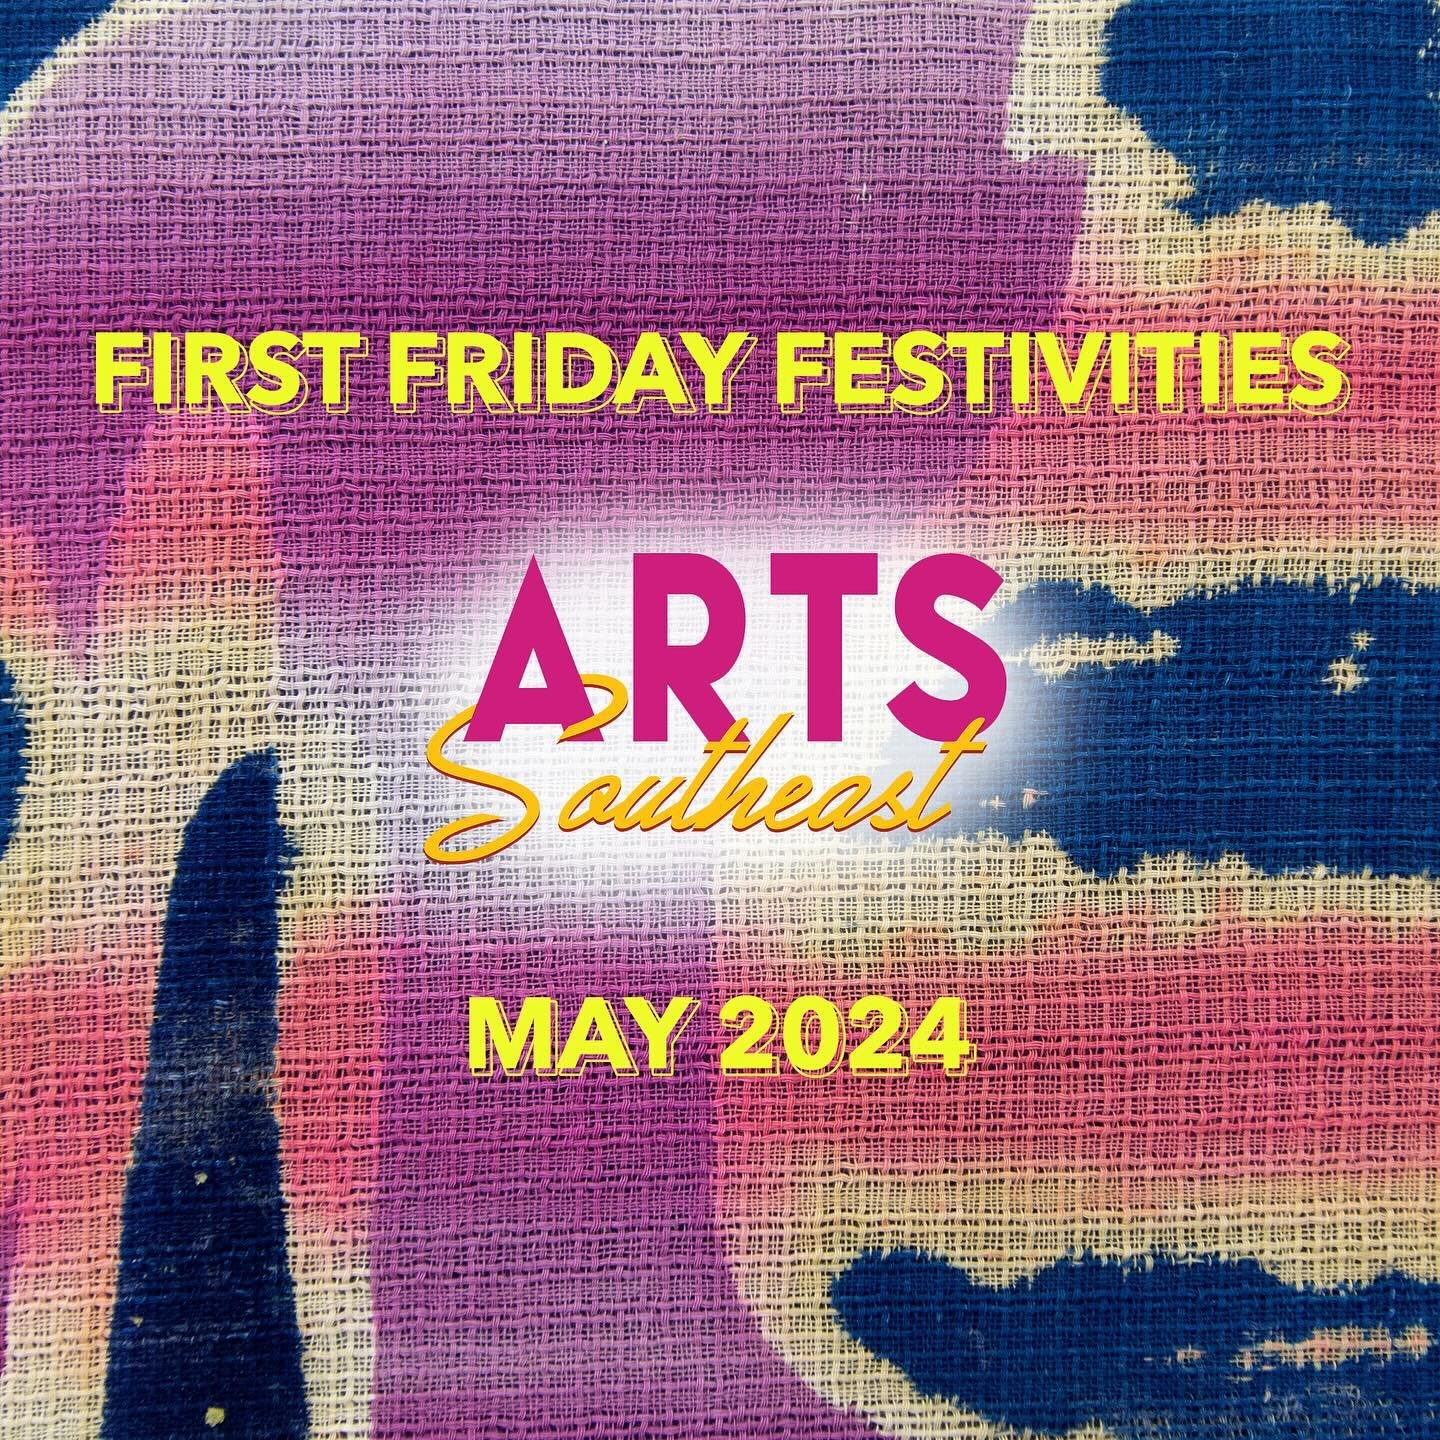 Join us tonight from 5 - 9PM for May First Friday!! #FirstFridaysInStarland Festivities include: 

↗️ The Ellis Gallery: Opening Reception: &ldquo;Bodyjumpers&rdquo; by Leia Genis @leiagenis 

↗️ARTS Southeast Supporter Gallery: Closing Reception: &l